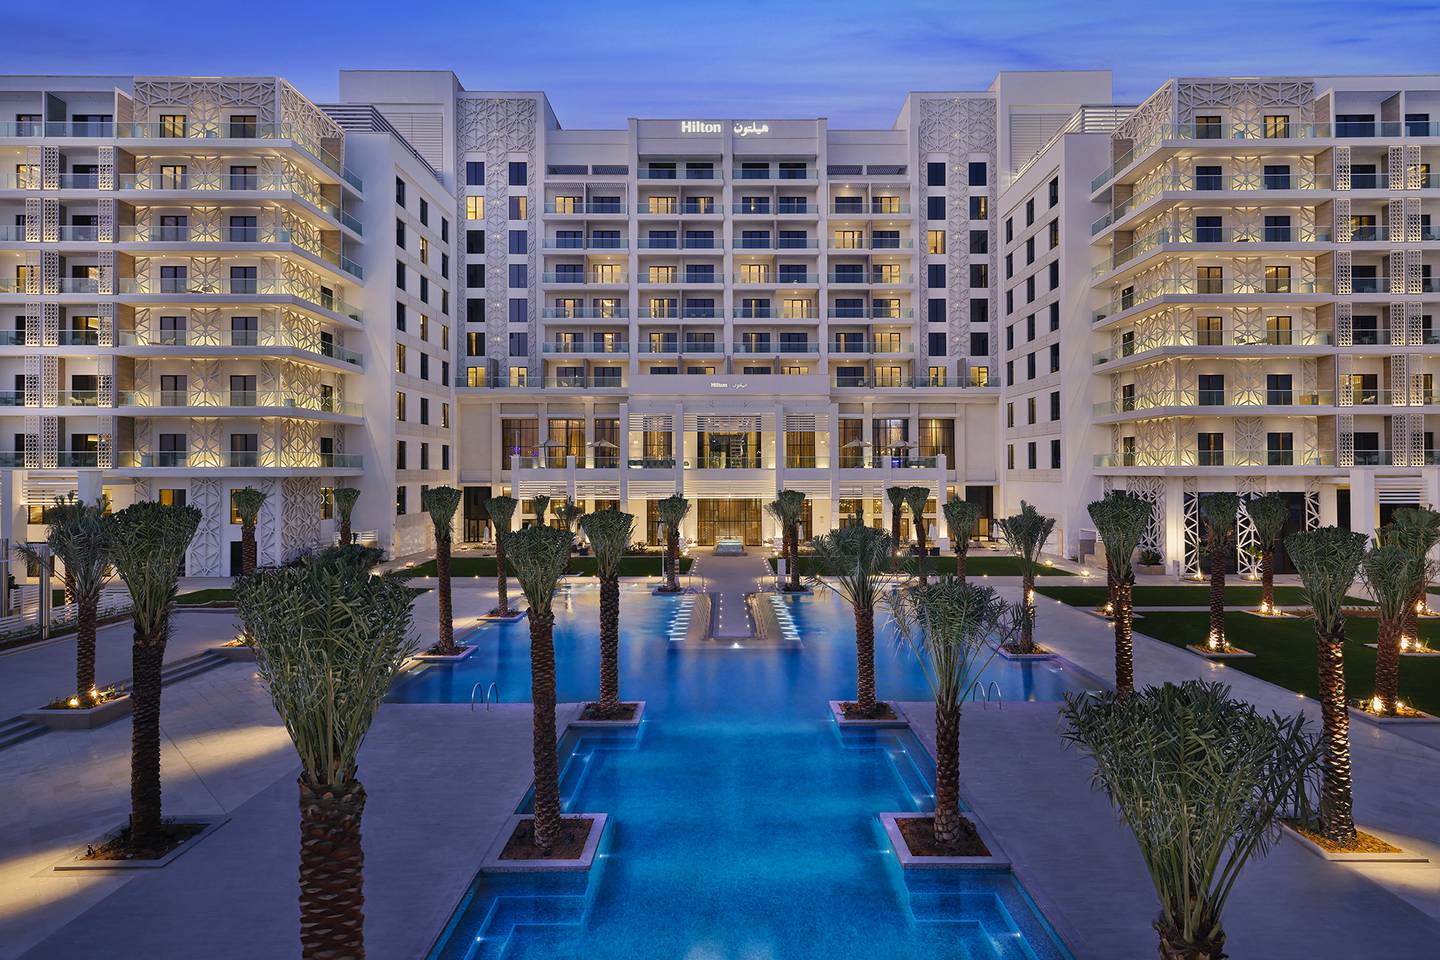 Hilton Abu Dhabi Yas Island is acting as a gateway to all of the island’s attractions. Courtesy Hilton Abu Dhabi Yas Island